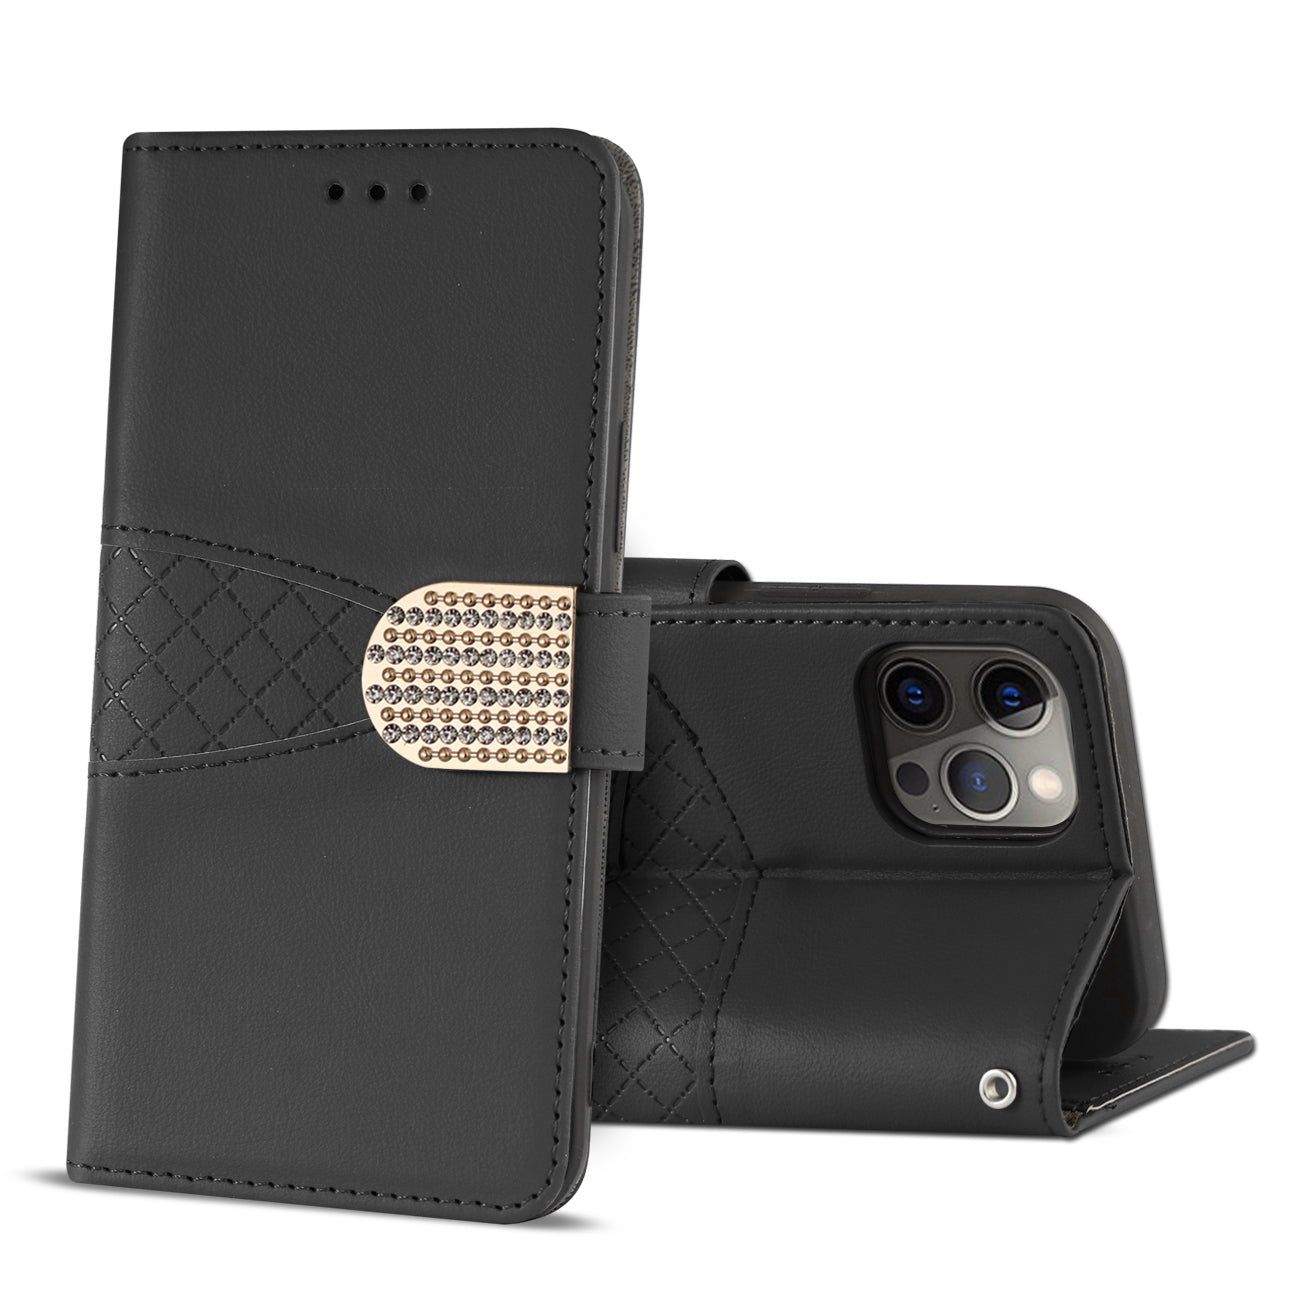 3-In-1 Wallet Case for IPHONE 12/ IPHONE 12 PRO In Black